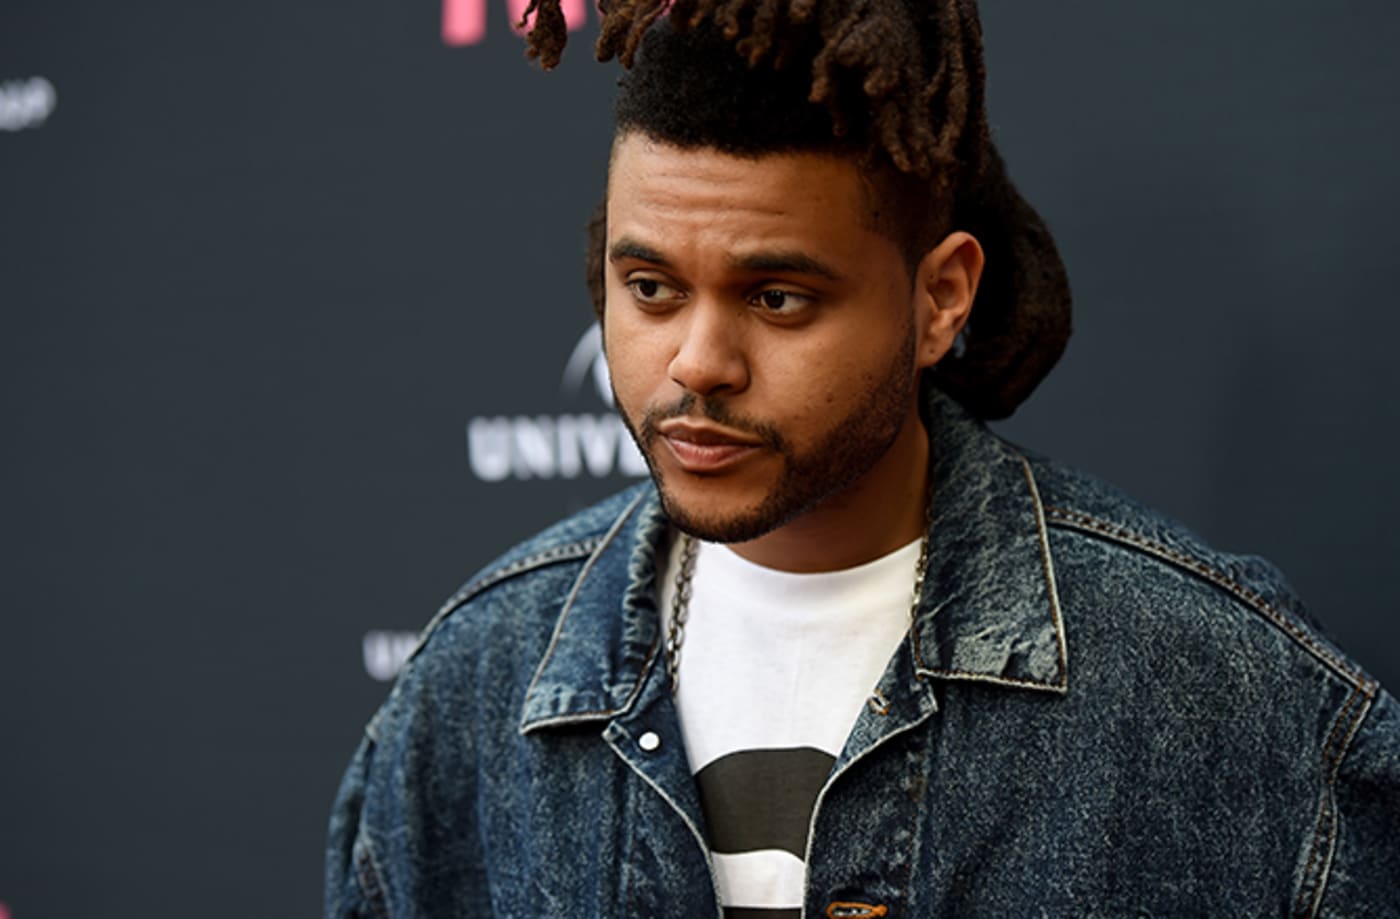 This is a photo of The Weeknd